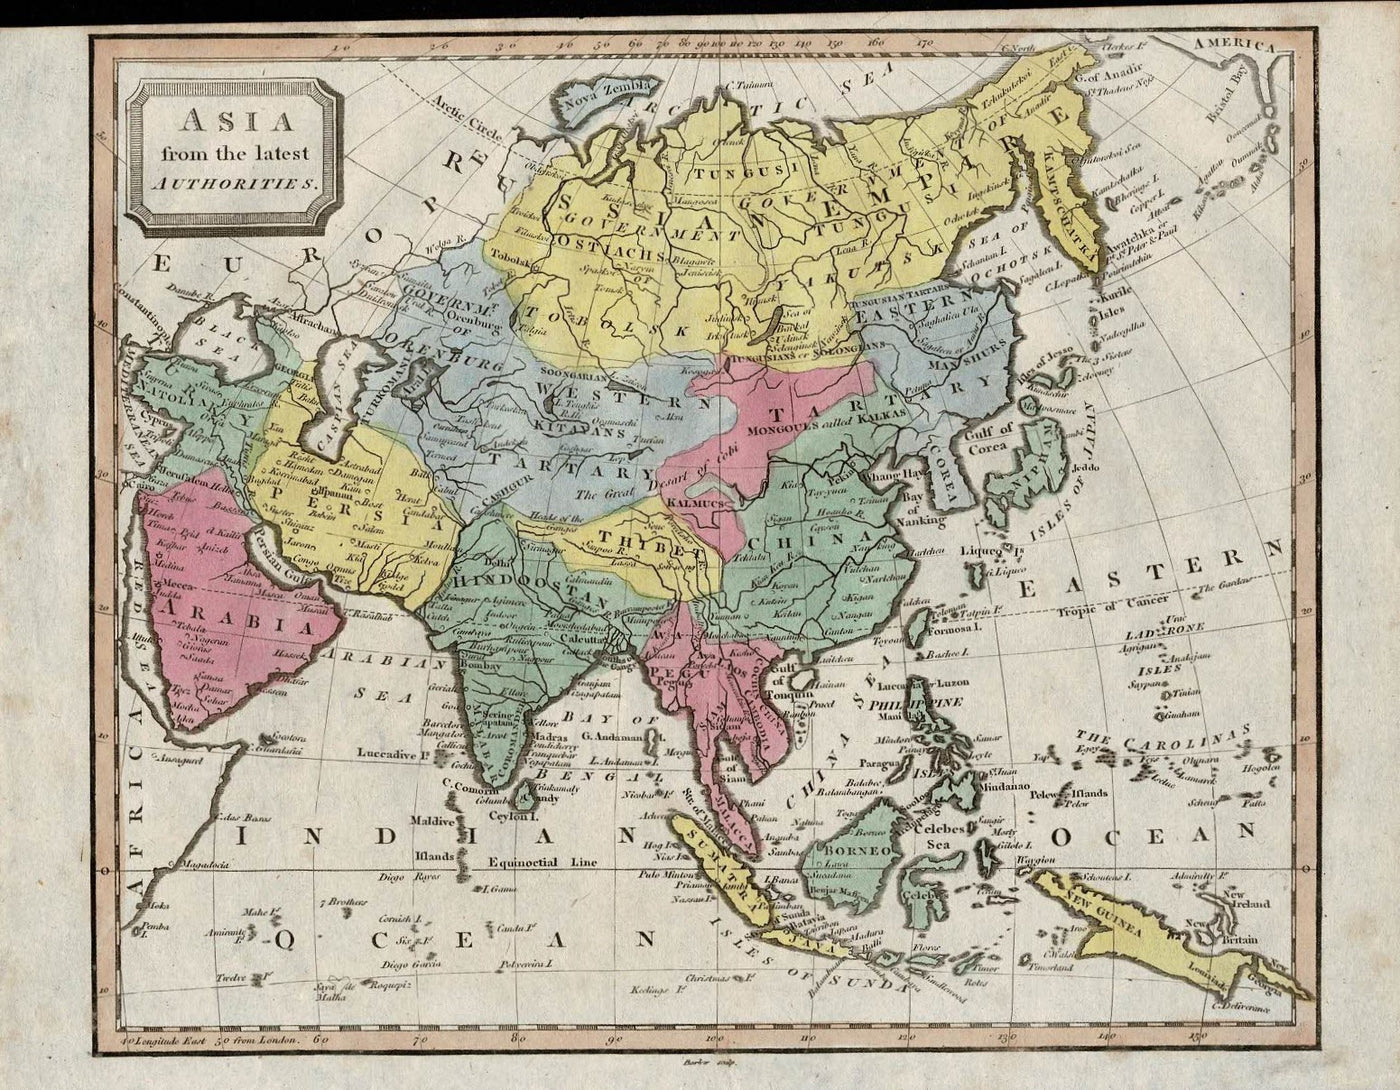 Asia from the latest authorities antique map 1815